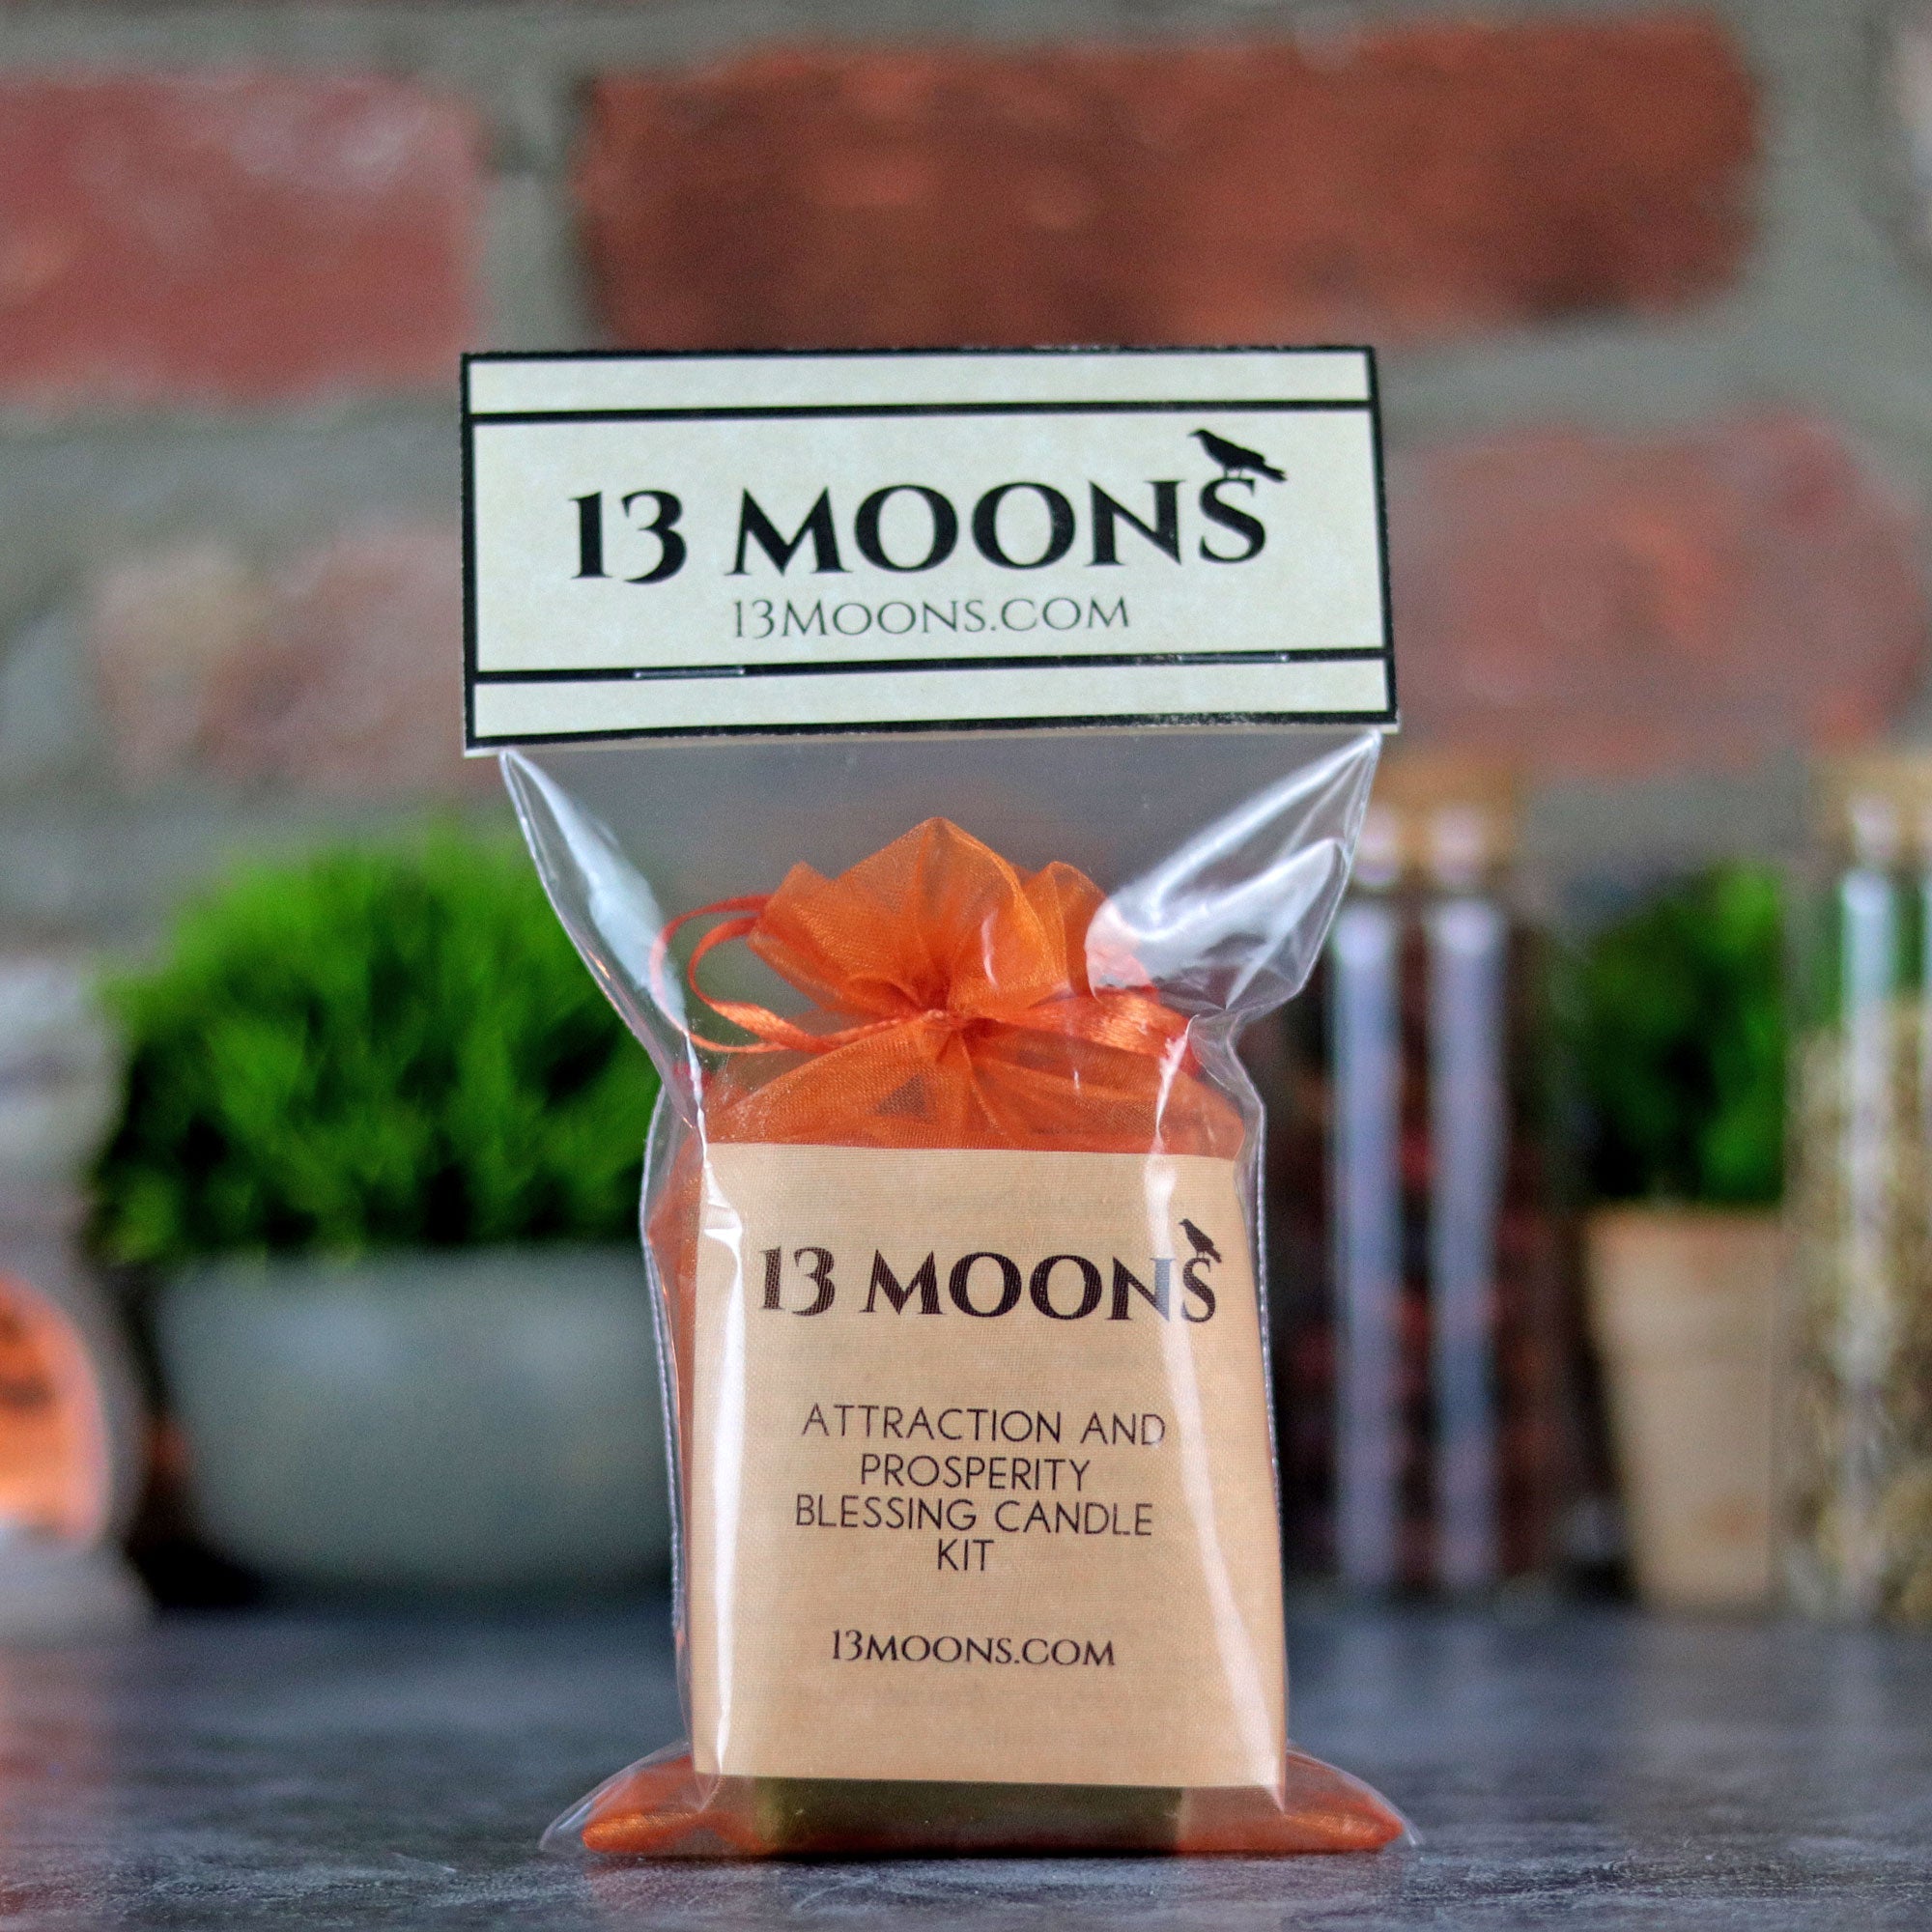 Attraction and Prosperity Blessing Candle Kit - 13 Moons